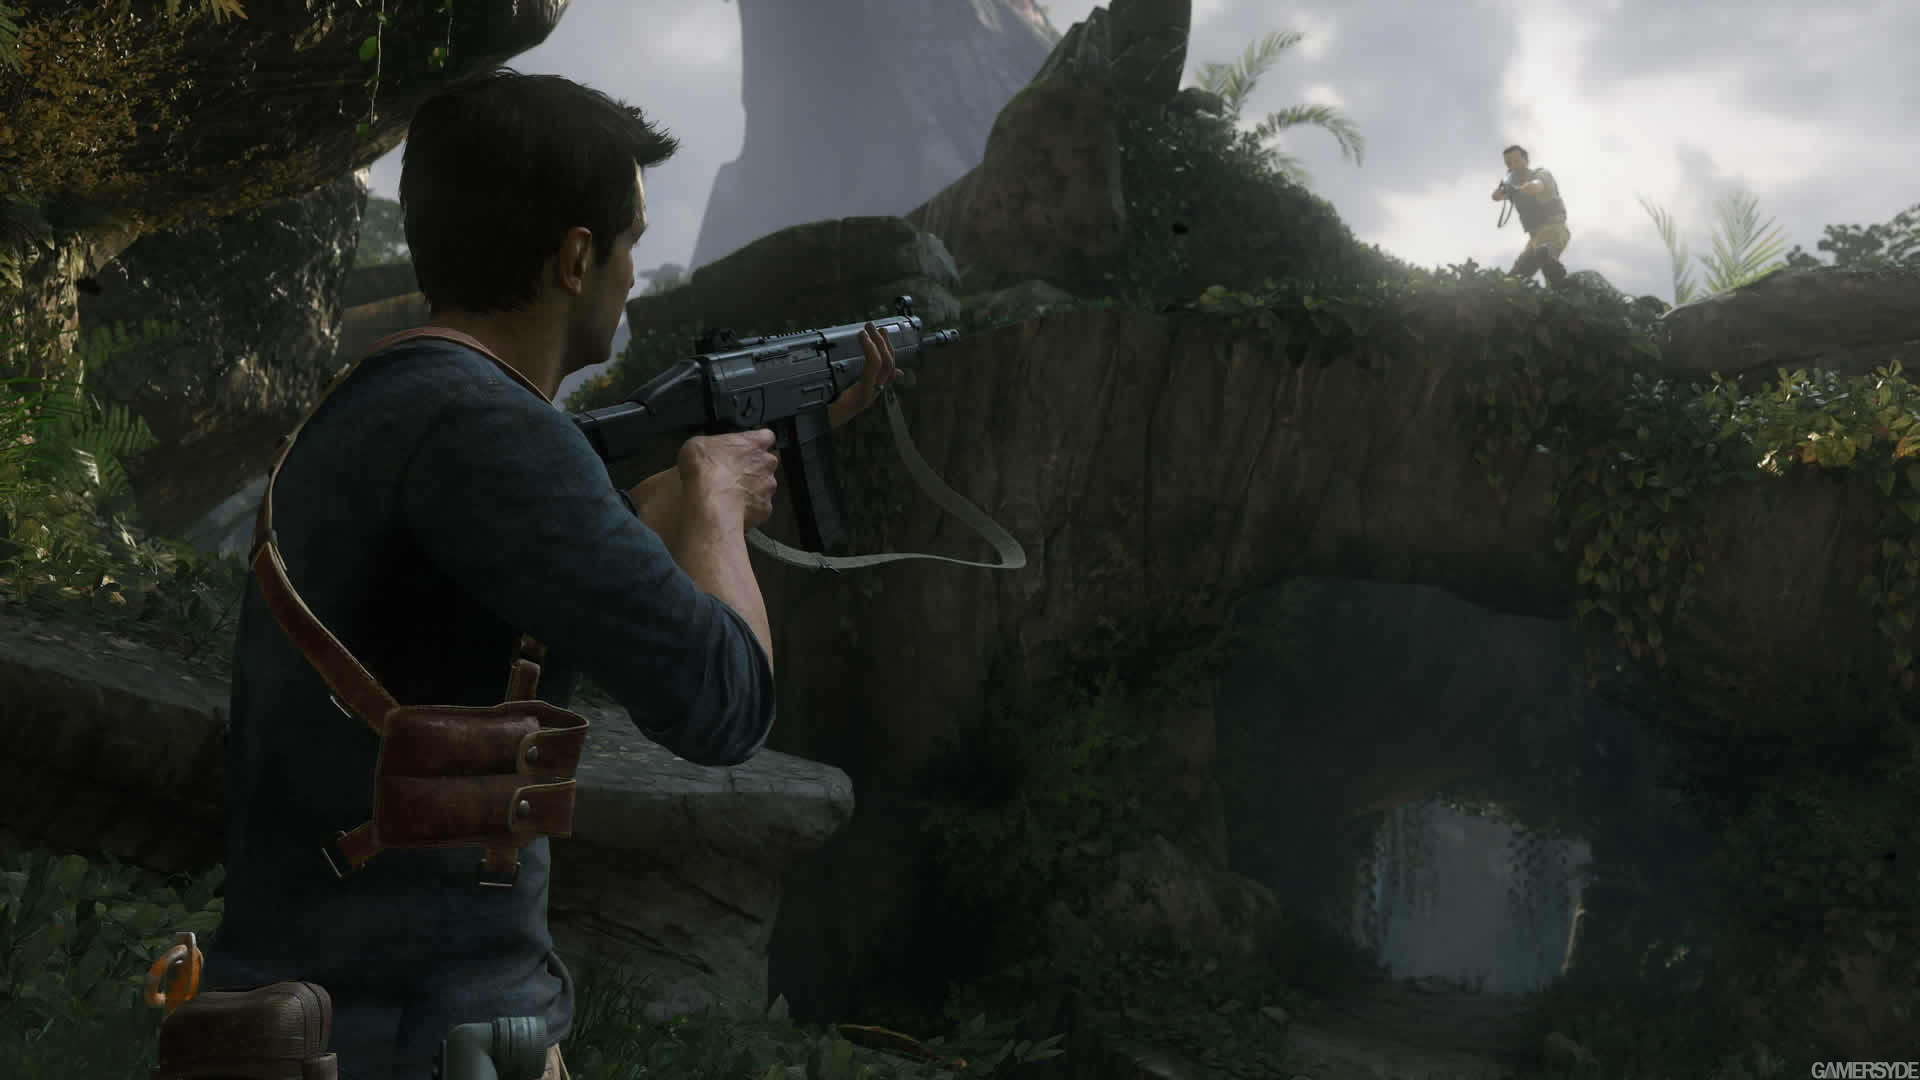 image_uncharted_4_a_thief_s_end-27386-2995_0001.jpg